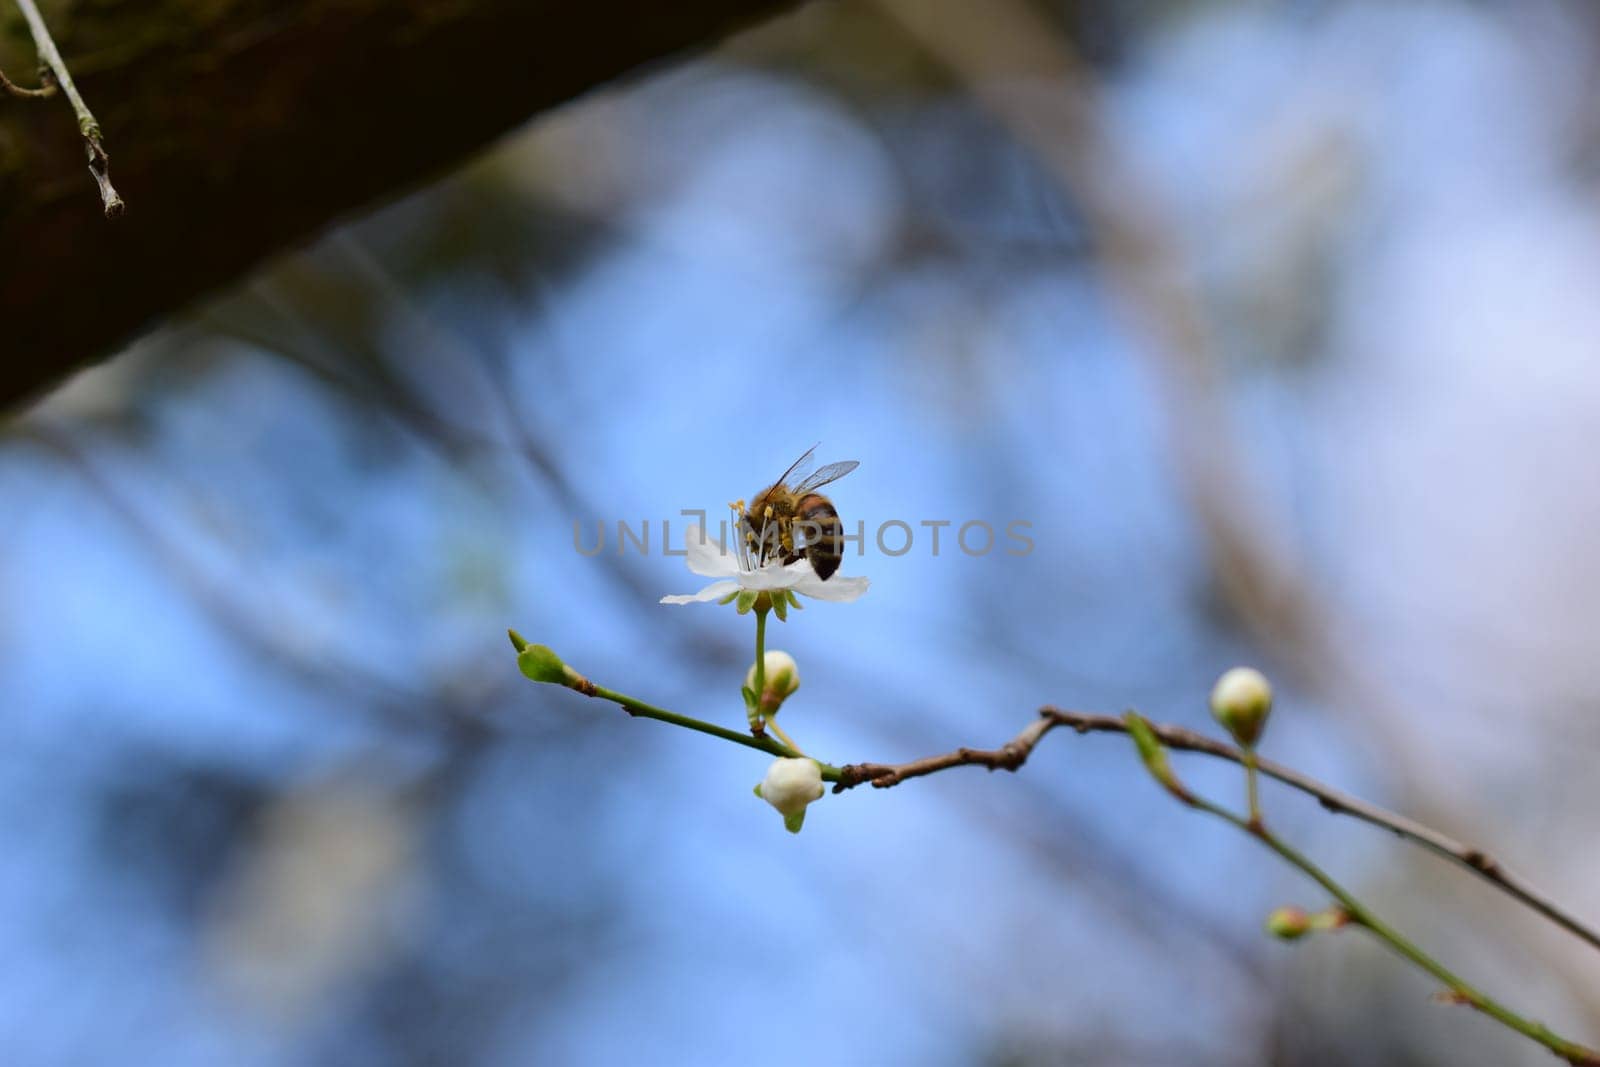 Close up of a bee on a white blossom against a blurred background by Luise123